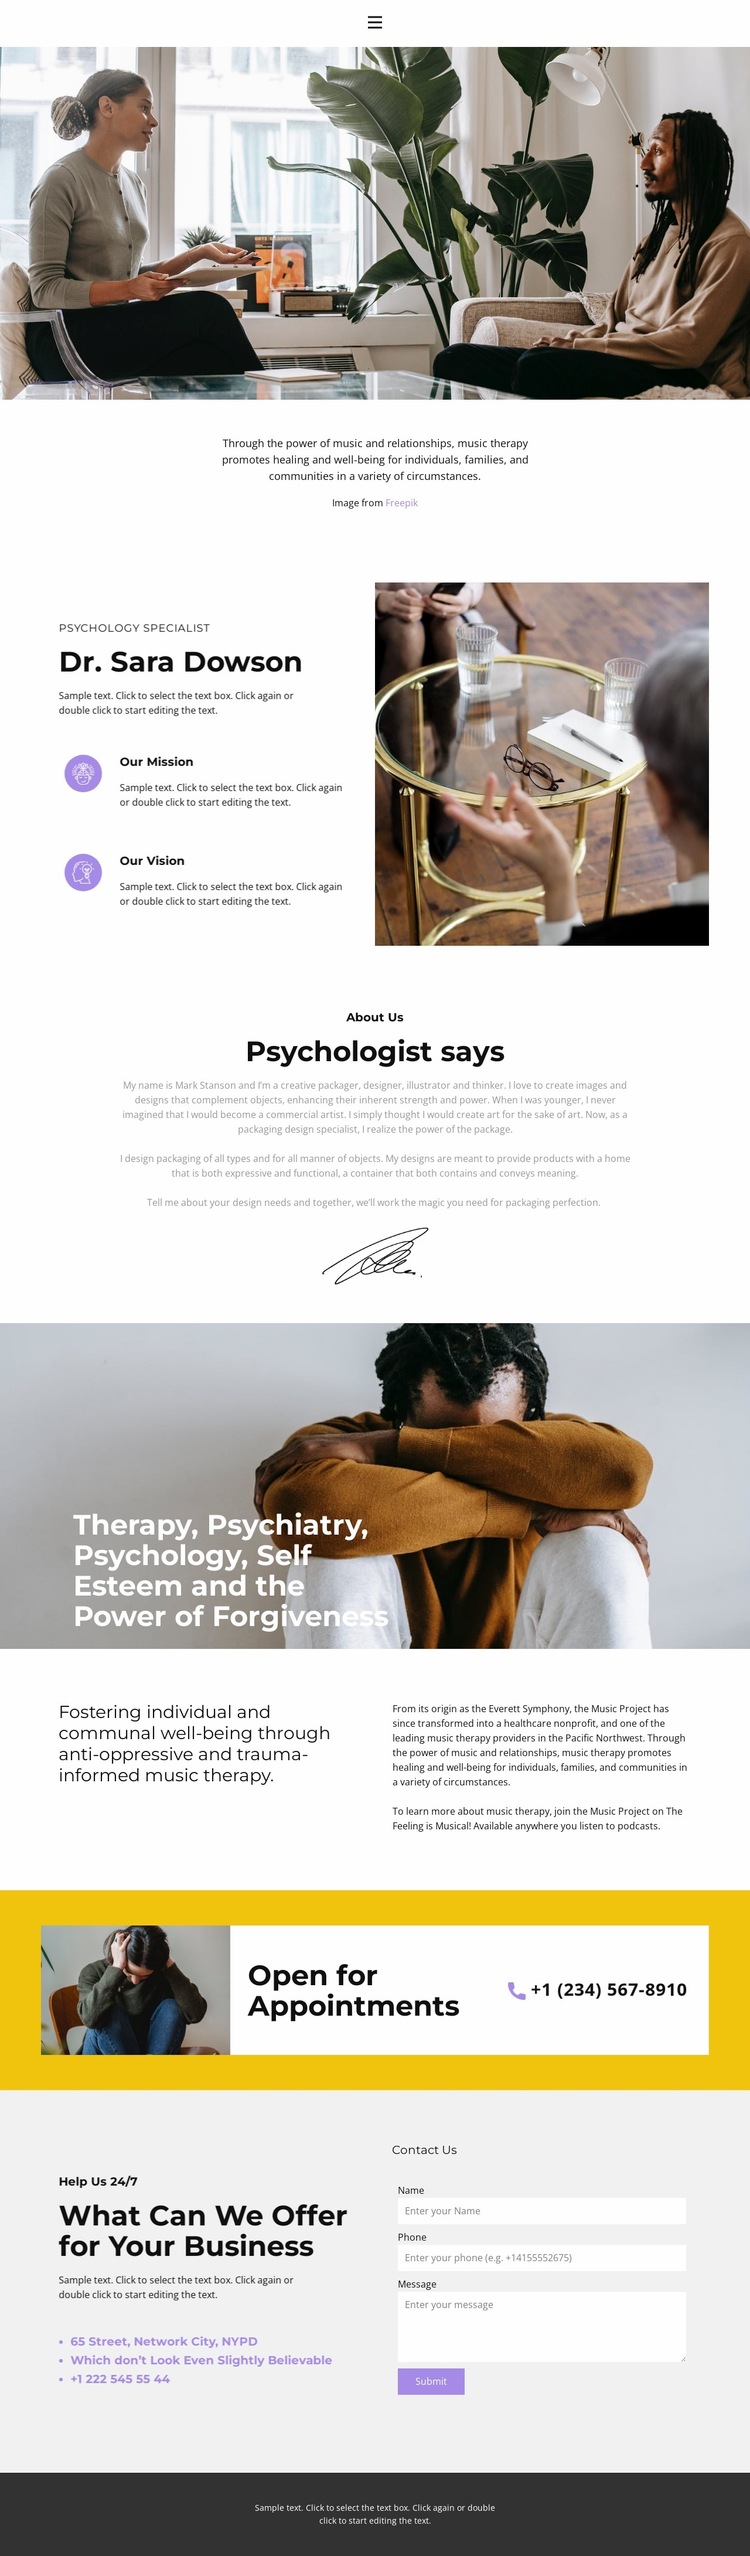 Qualified help from a psychologist Website Builder Templates